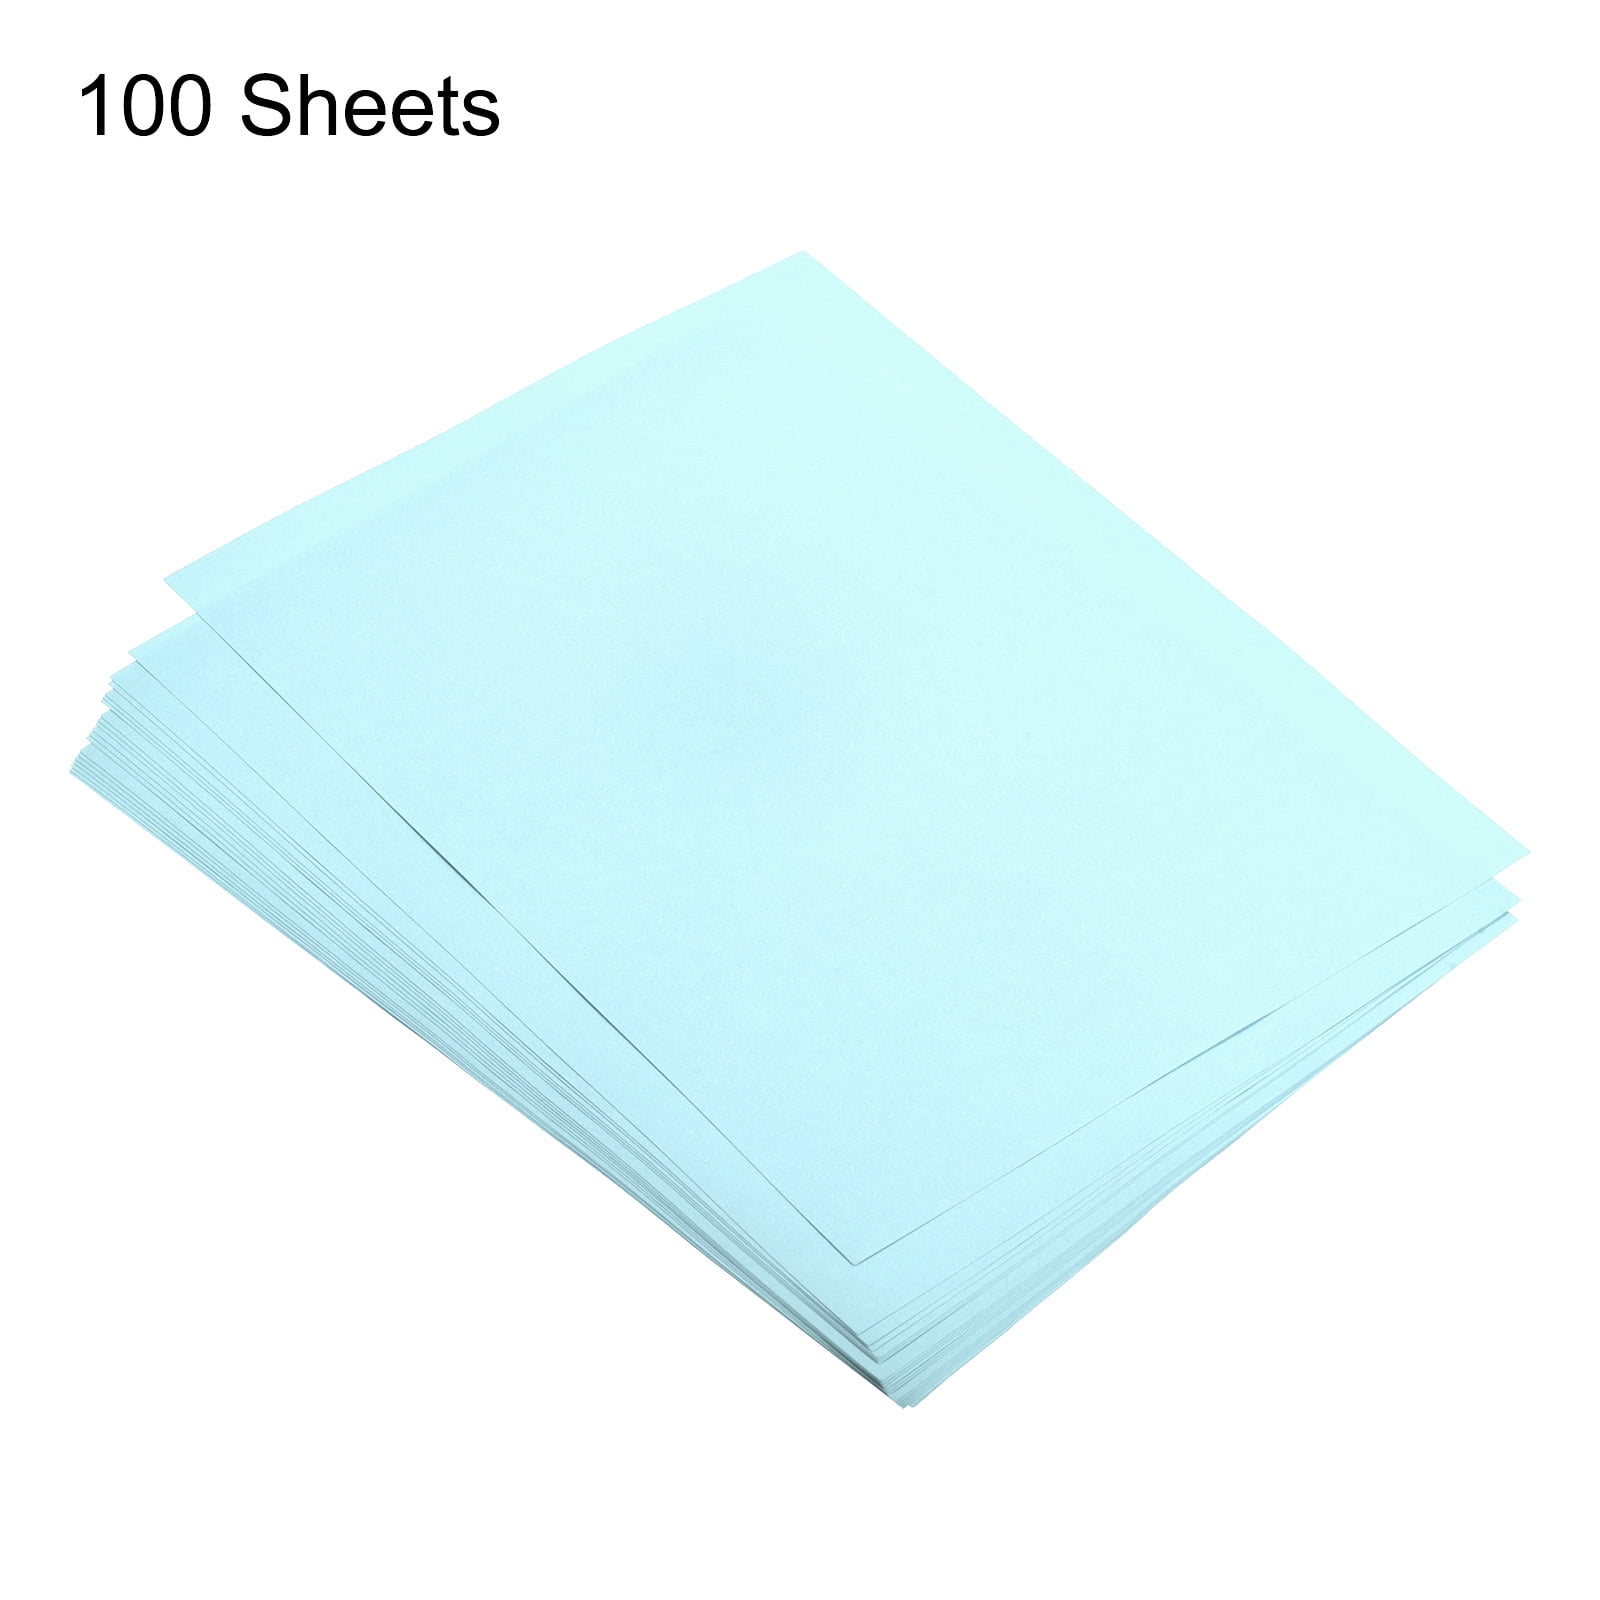  MECCANIXITY 50 Sheets Colored Copy Paper 8 1/2 Inch Printer  Paper 22lb/80gsm Light Blue for Office Printing, Document Copying,  Invitations, Forms, Art Projects : Office Products